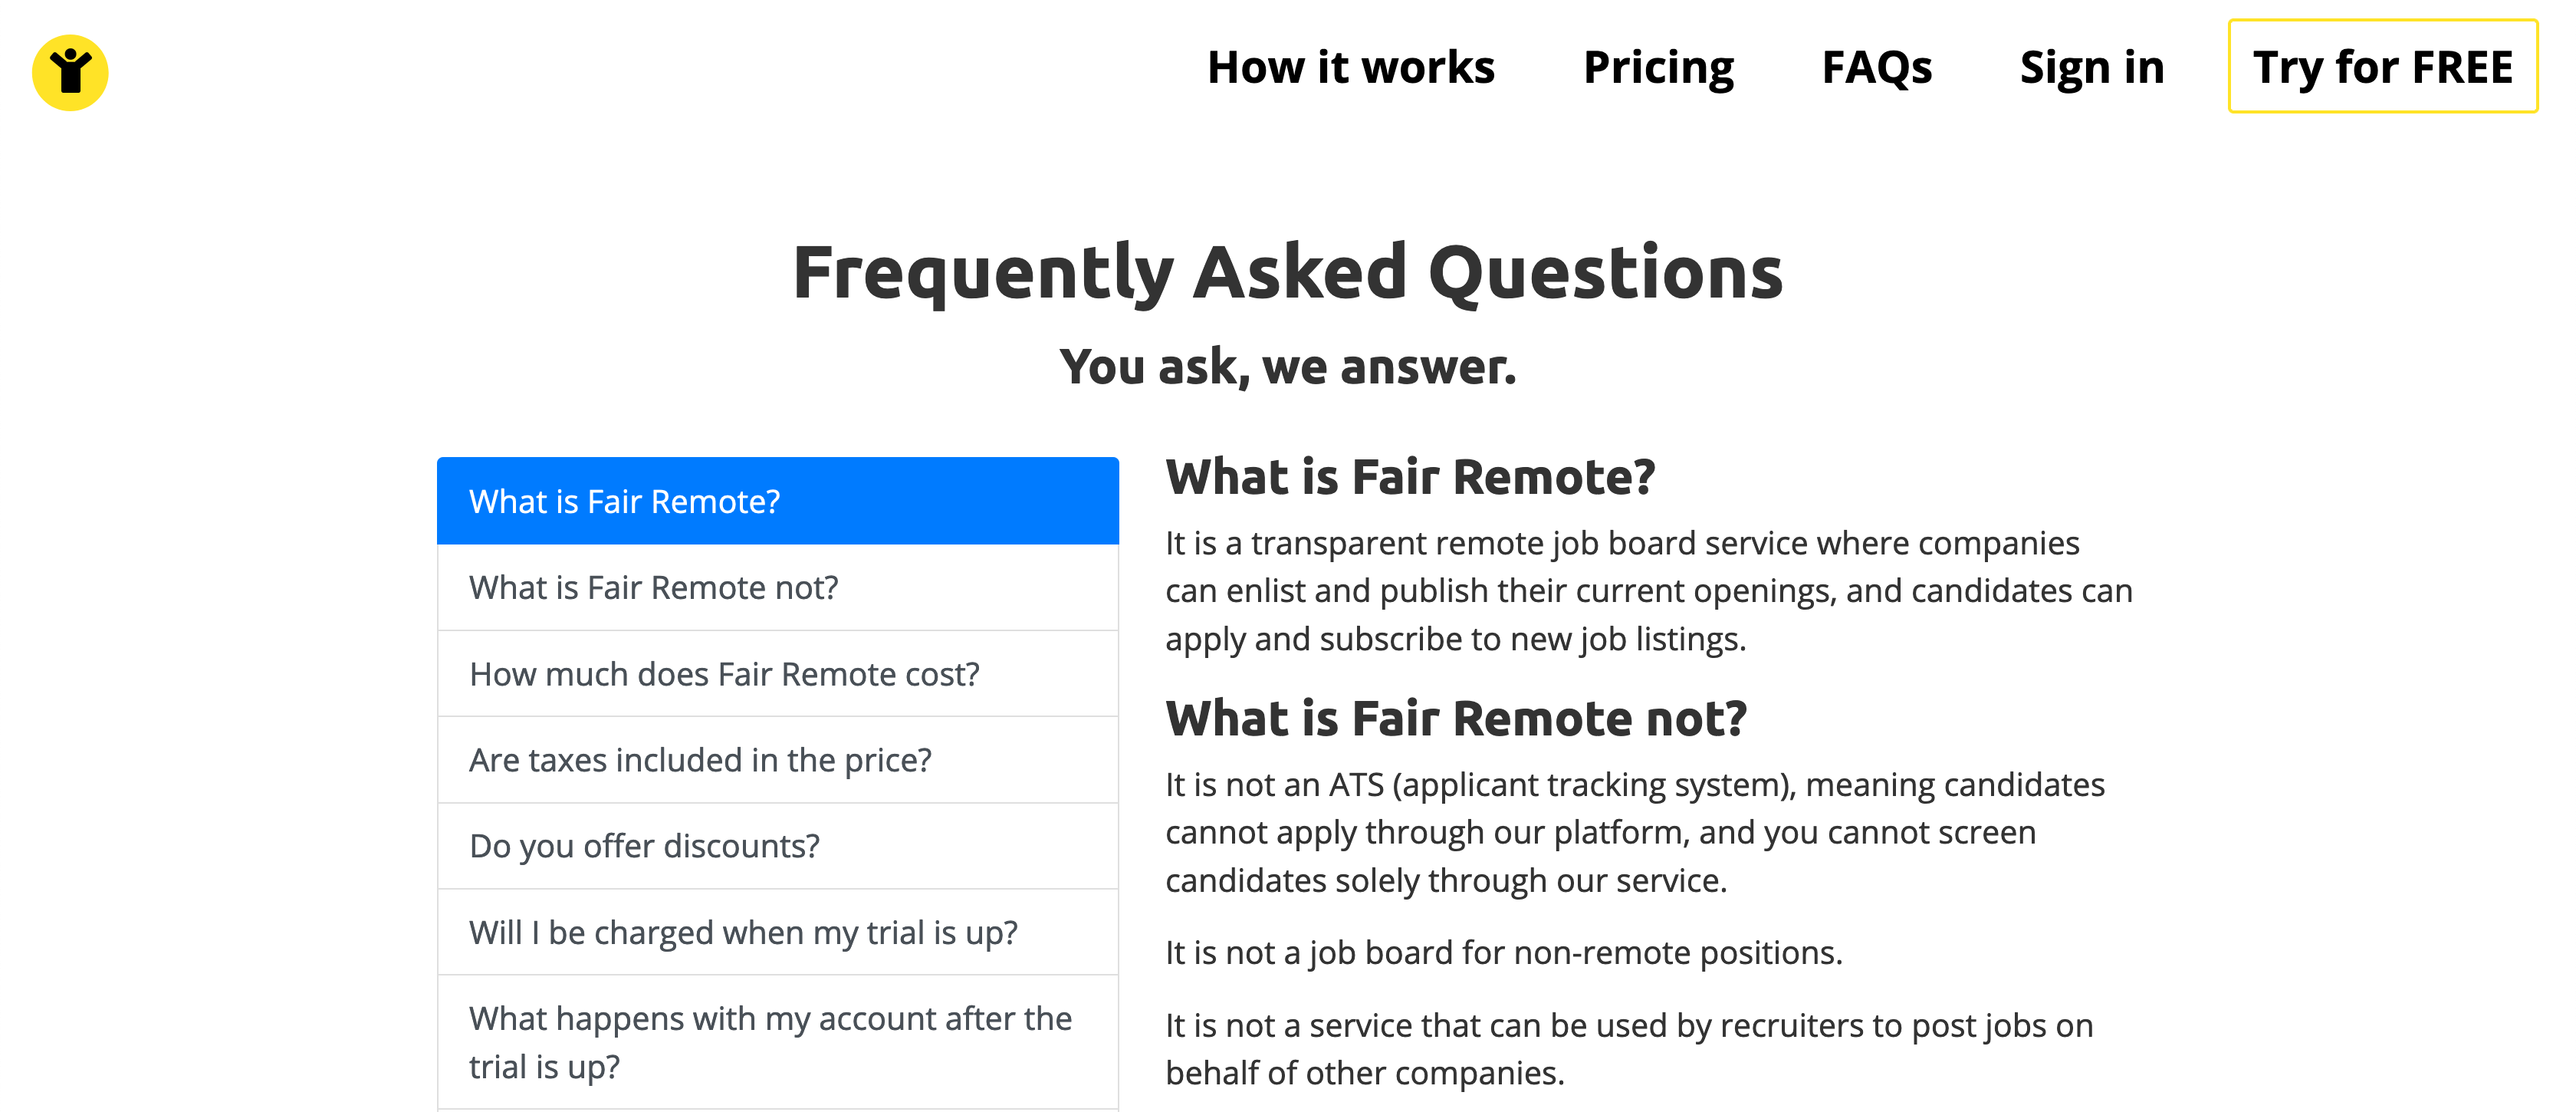 Find pricing, reviews and other details about Fair Remote